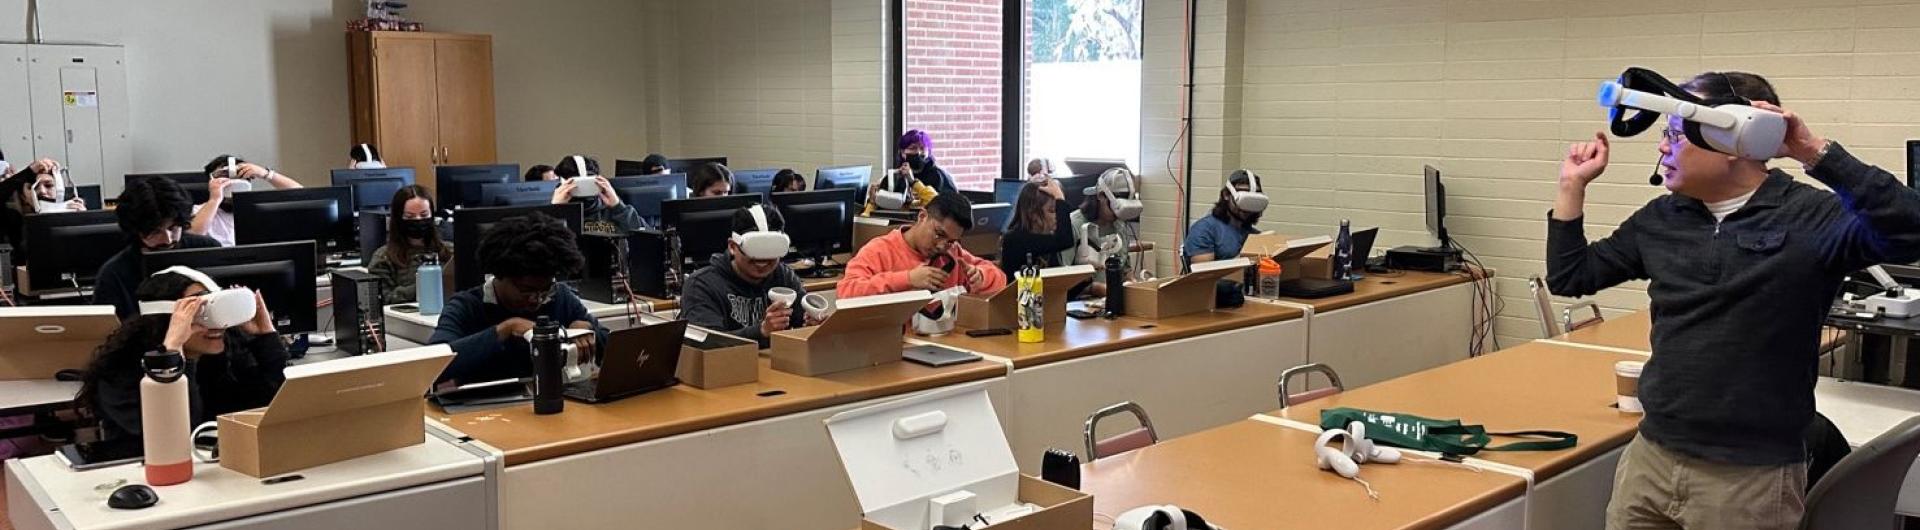 STudents test Virtual Reality equipment